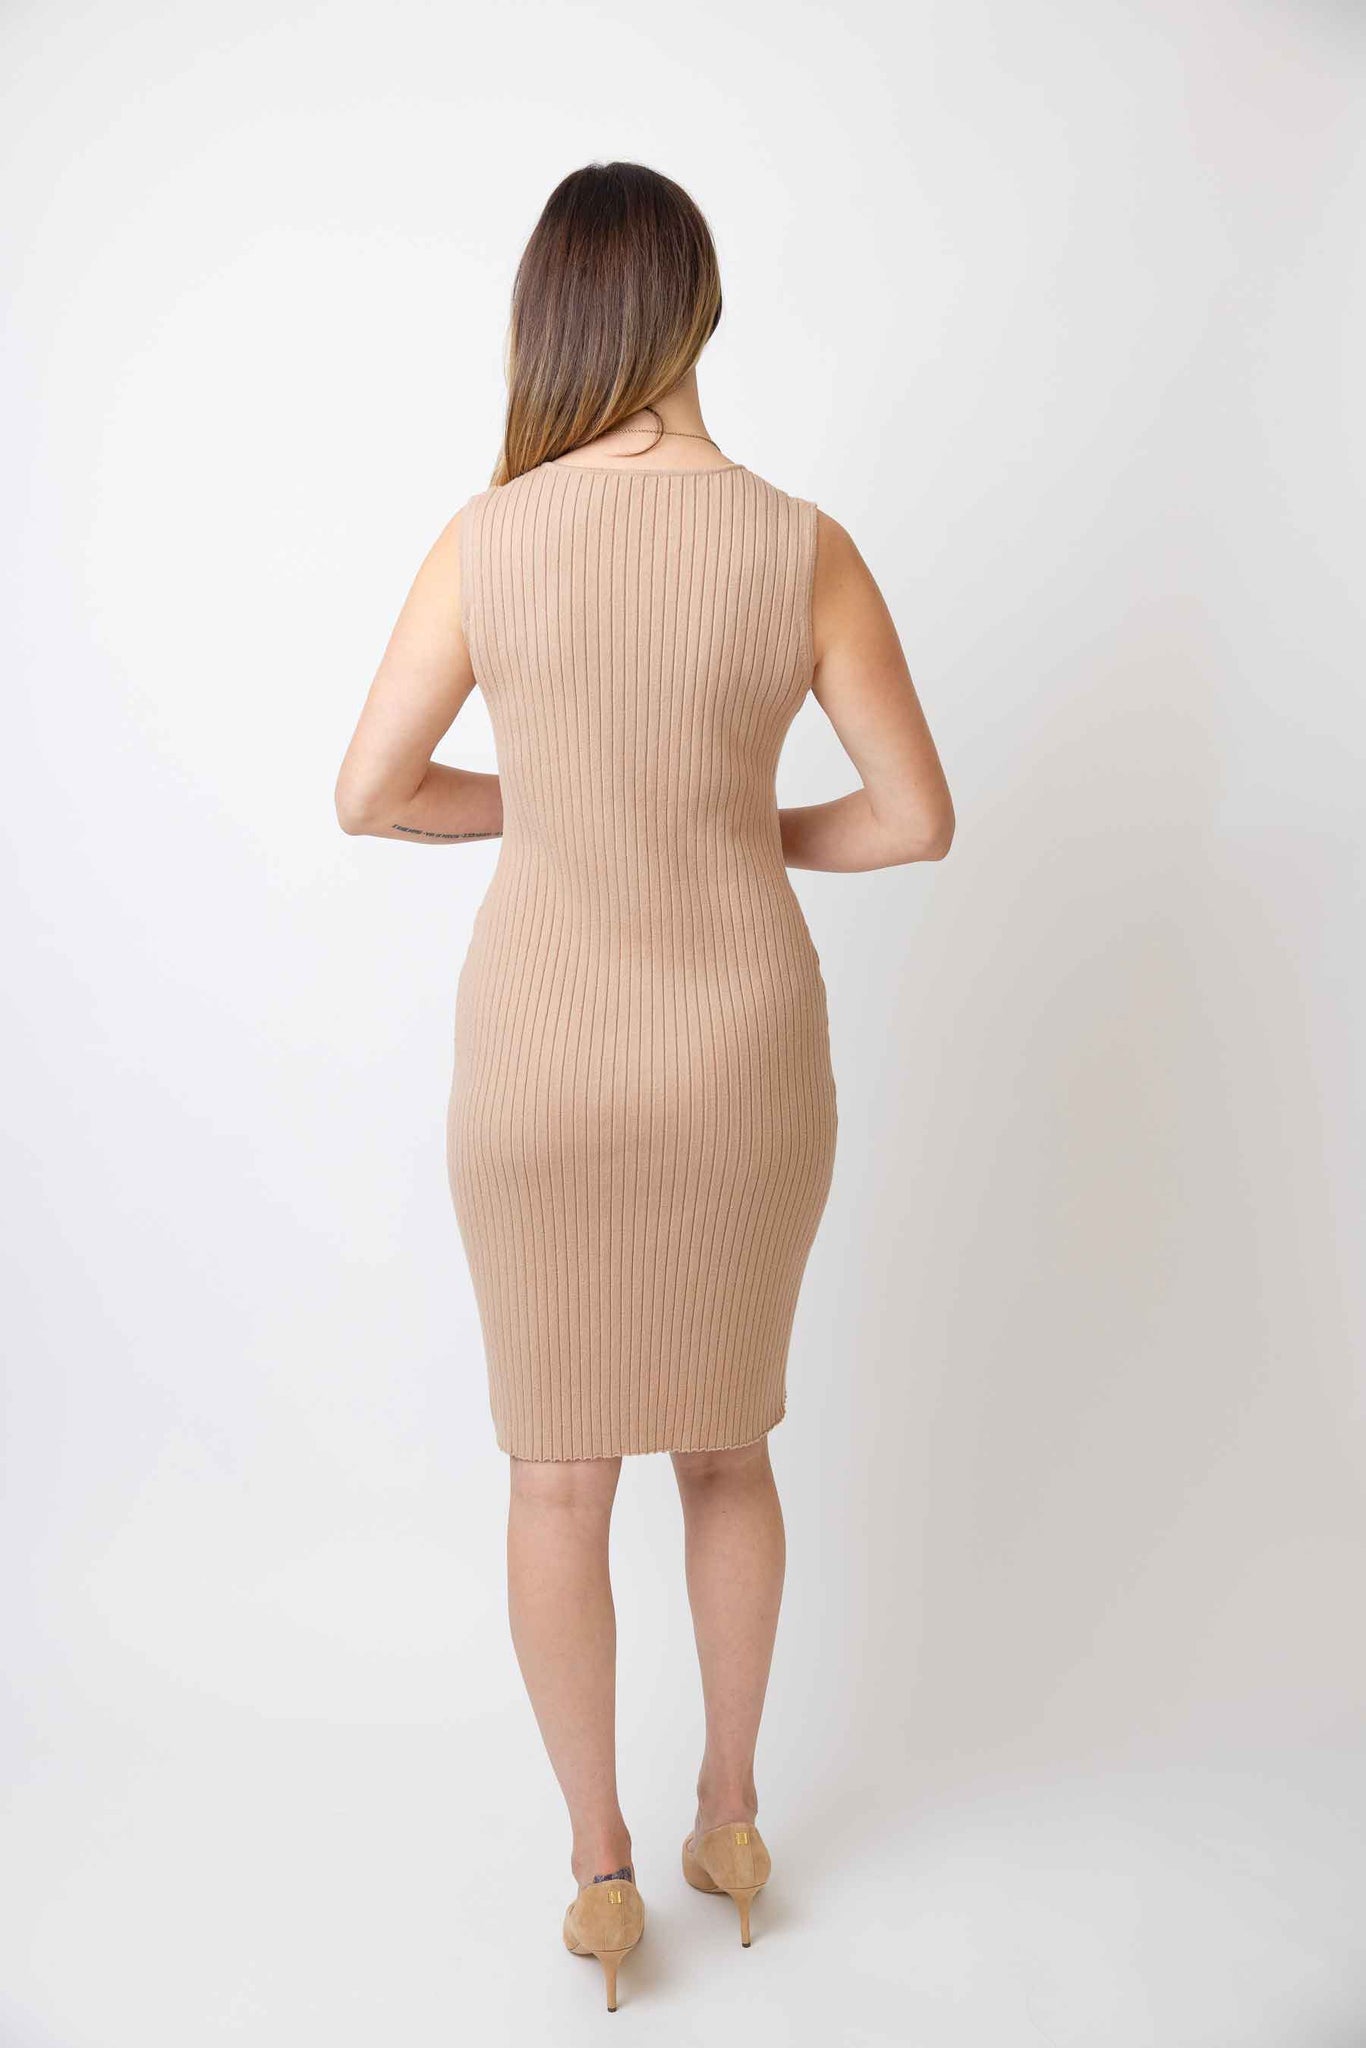 The back of The Happily Eva After Collection Eva Dress